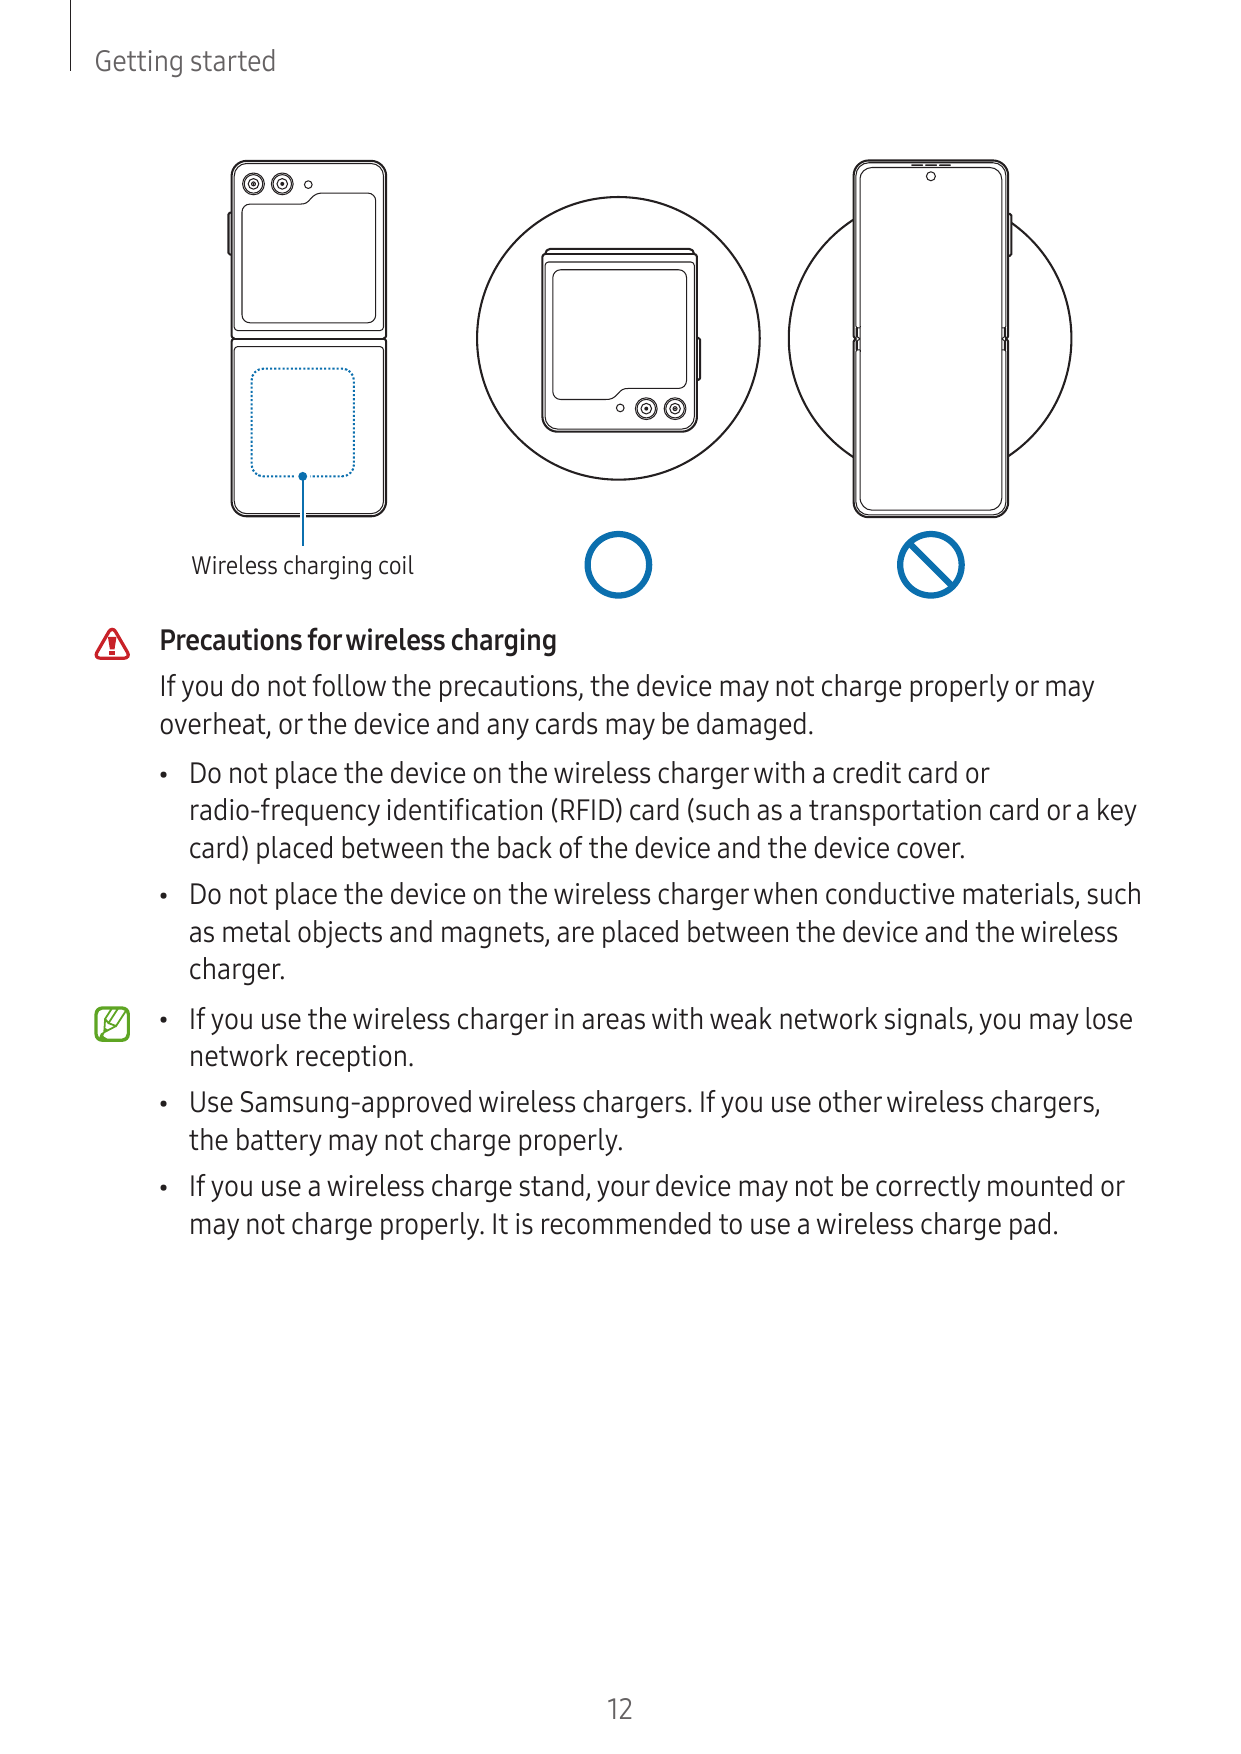 Getting startedWireless charging coilPrecautions for wireless chargingIf you do not follow the precautions, the device may not c